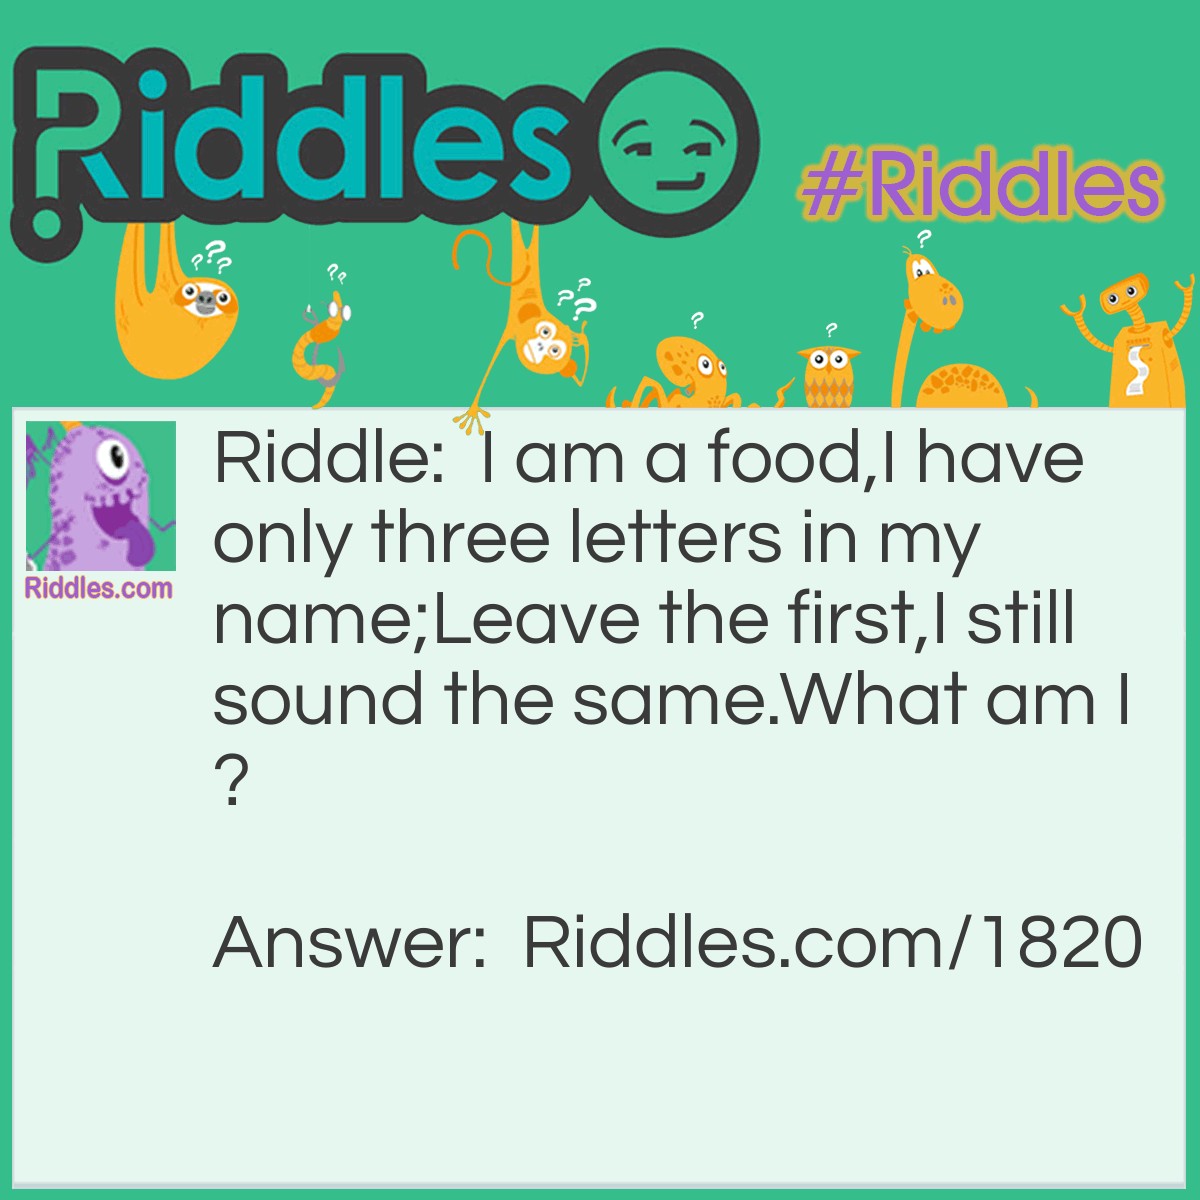 Riddle: I am a food,
I have only three letters in my name;
Leave the first,
I still sound the same.
What am I?  Answer: Pea